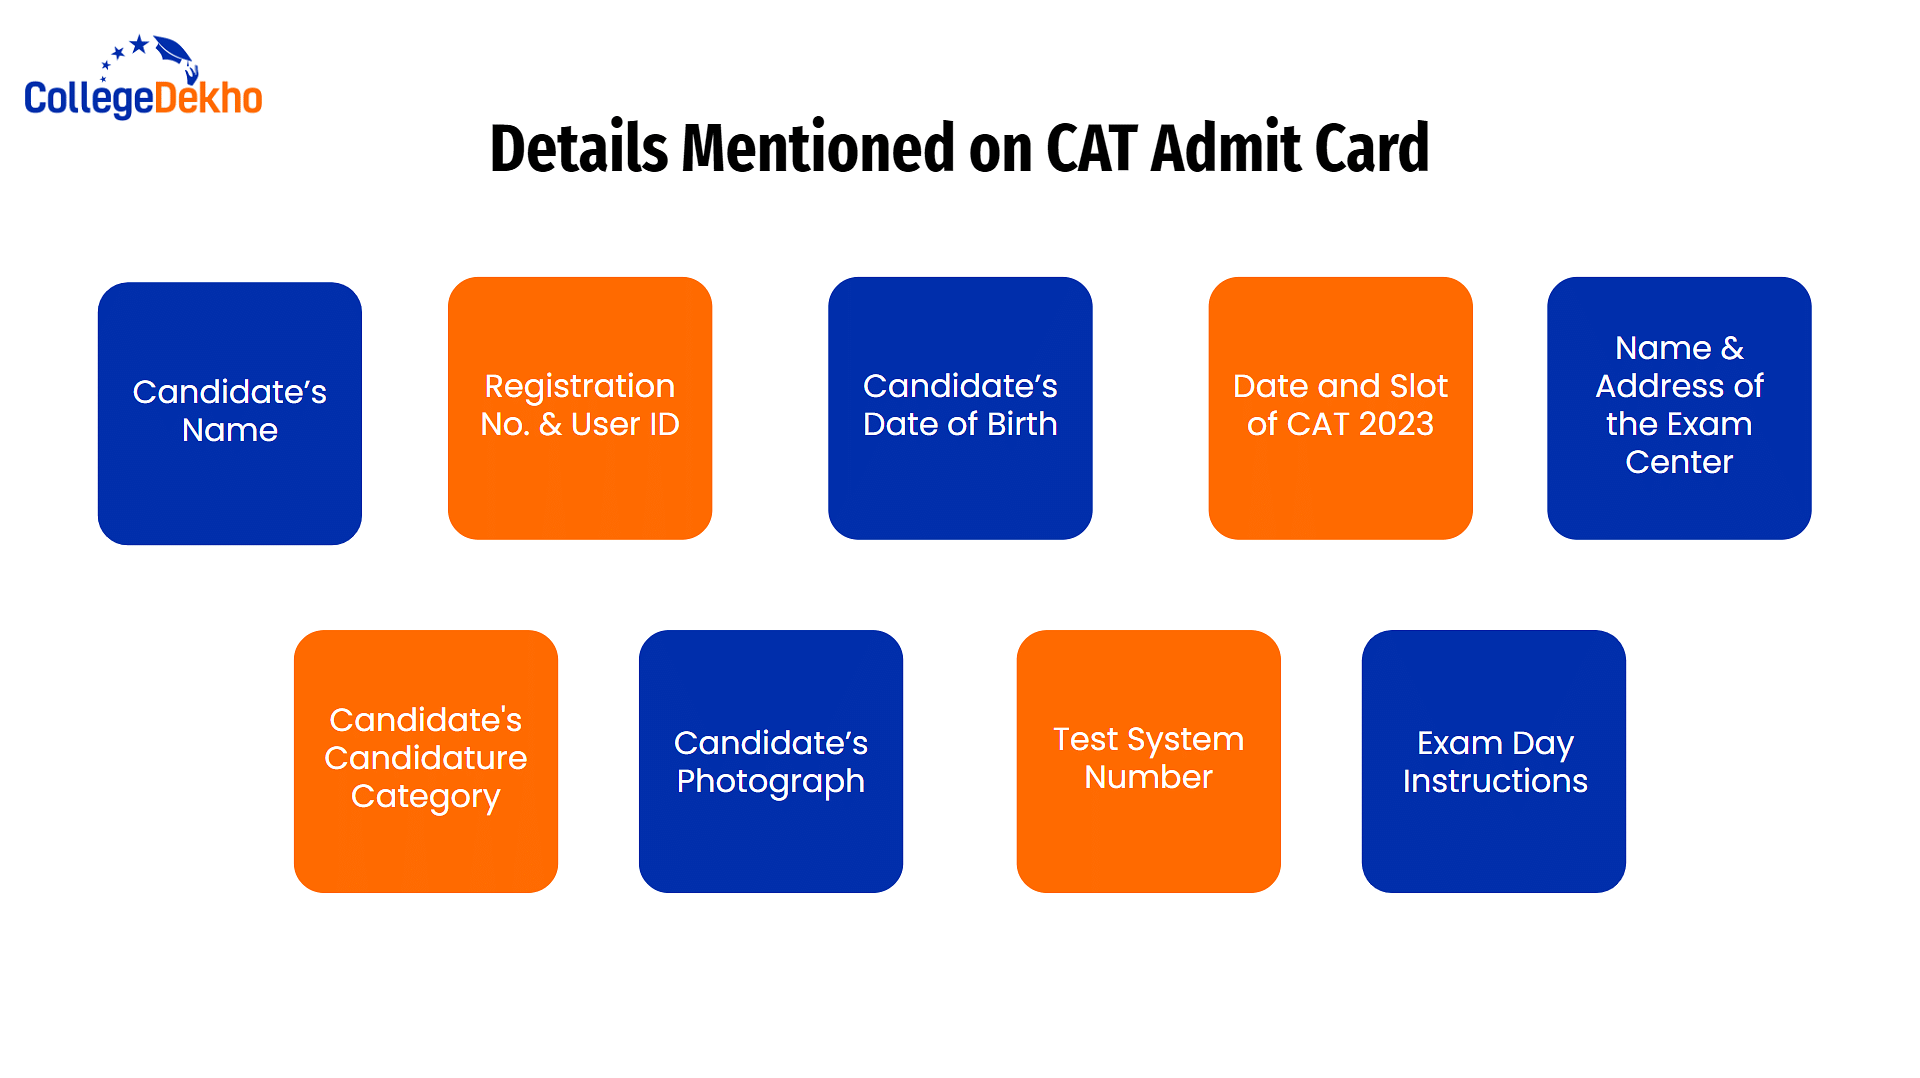 Details Mentioned on CAT Admit Card